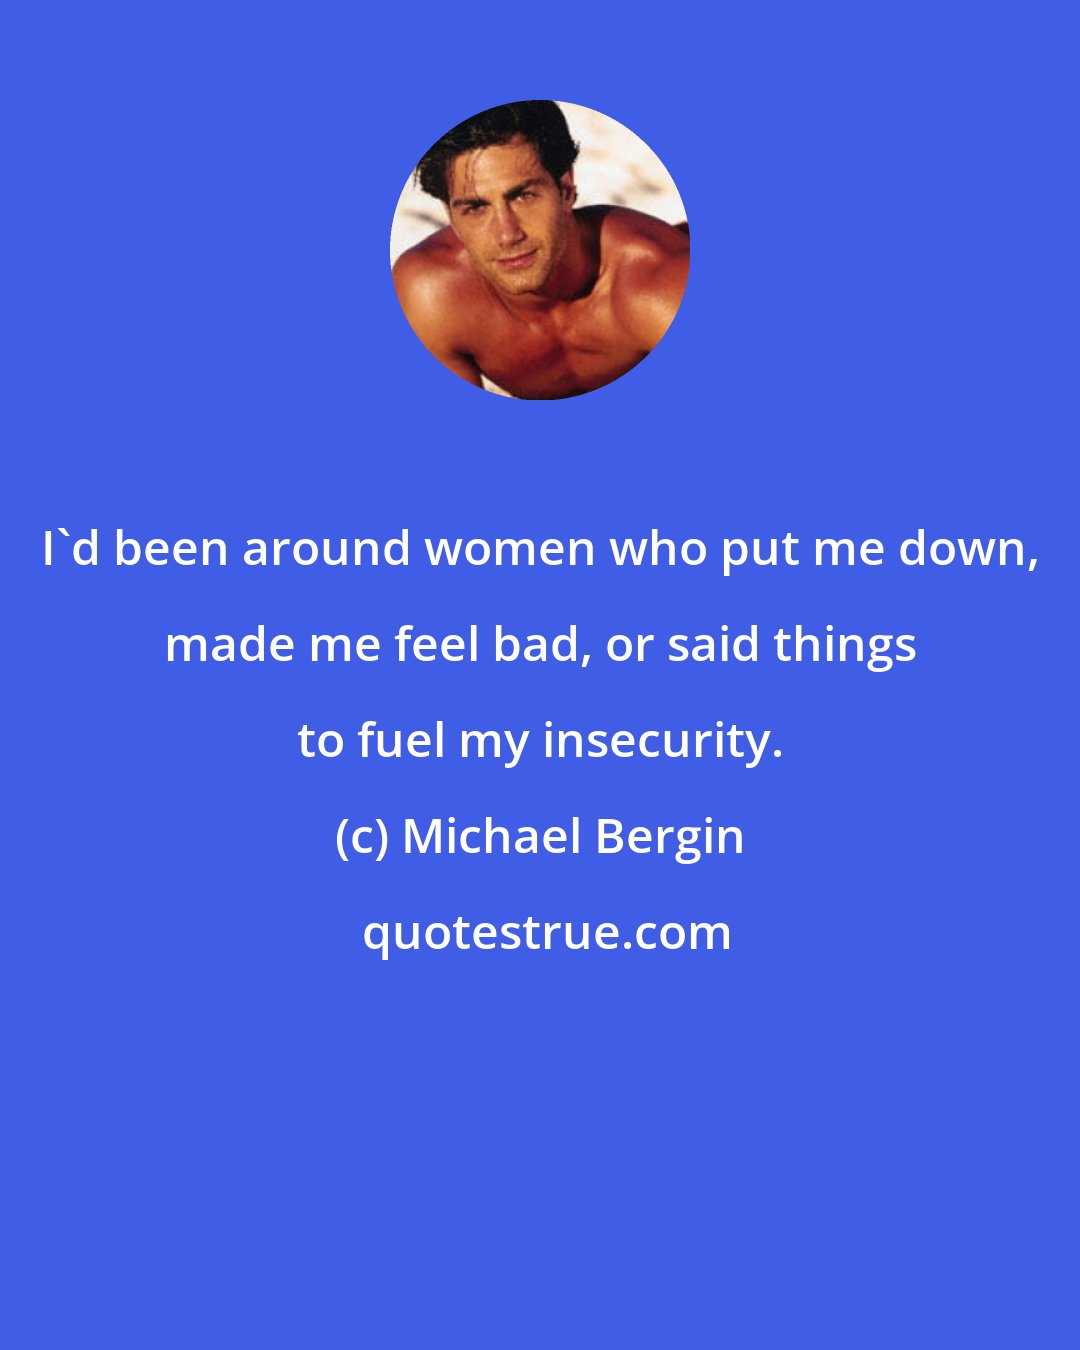 Michael Bergin: I'd been around women who put me down, made me feel bad, or said things to fuel my insecurity.